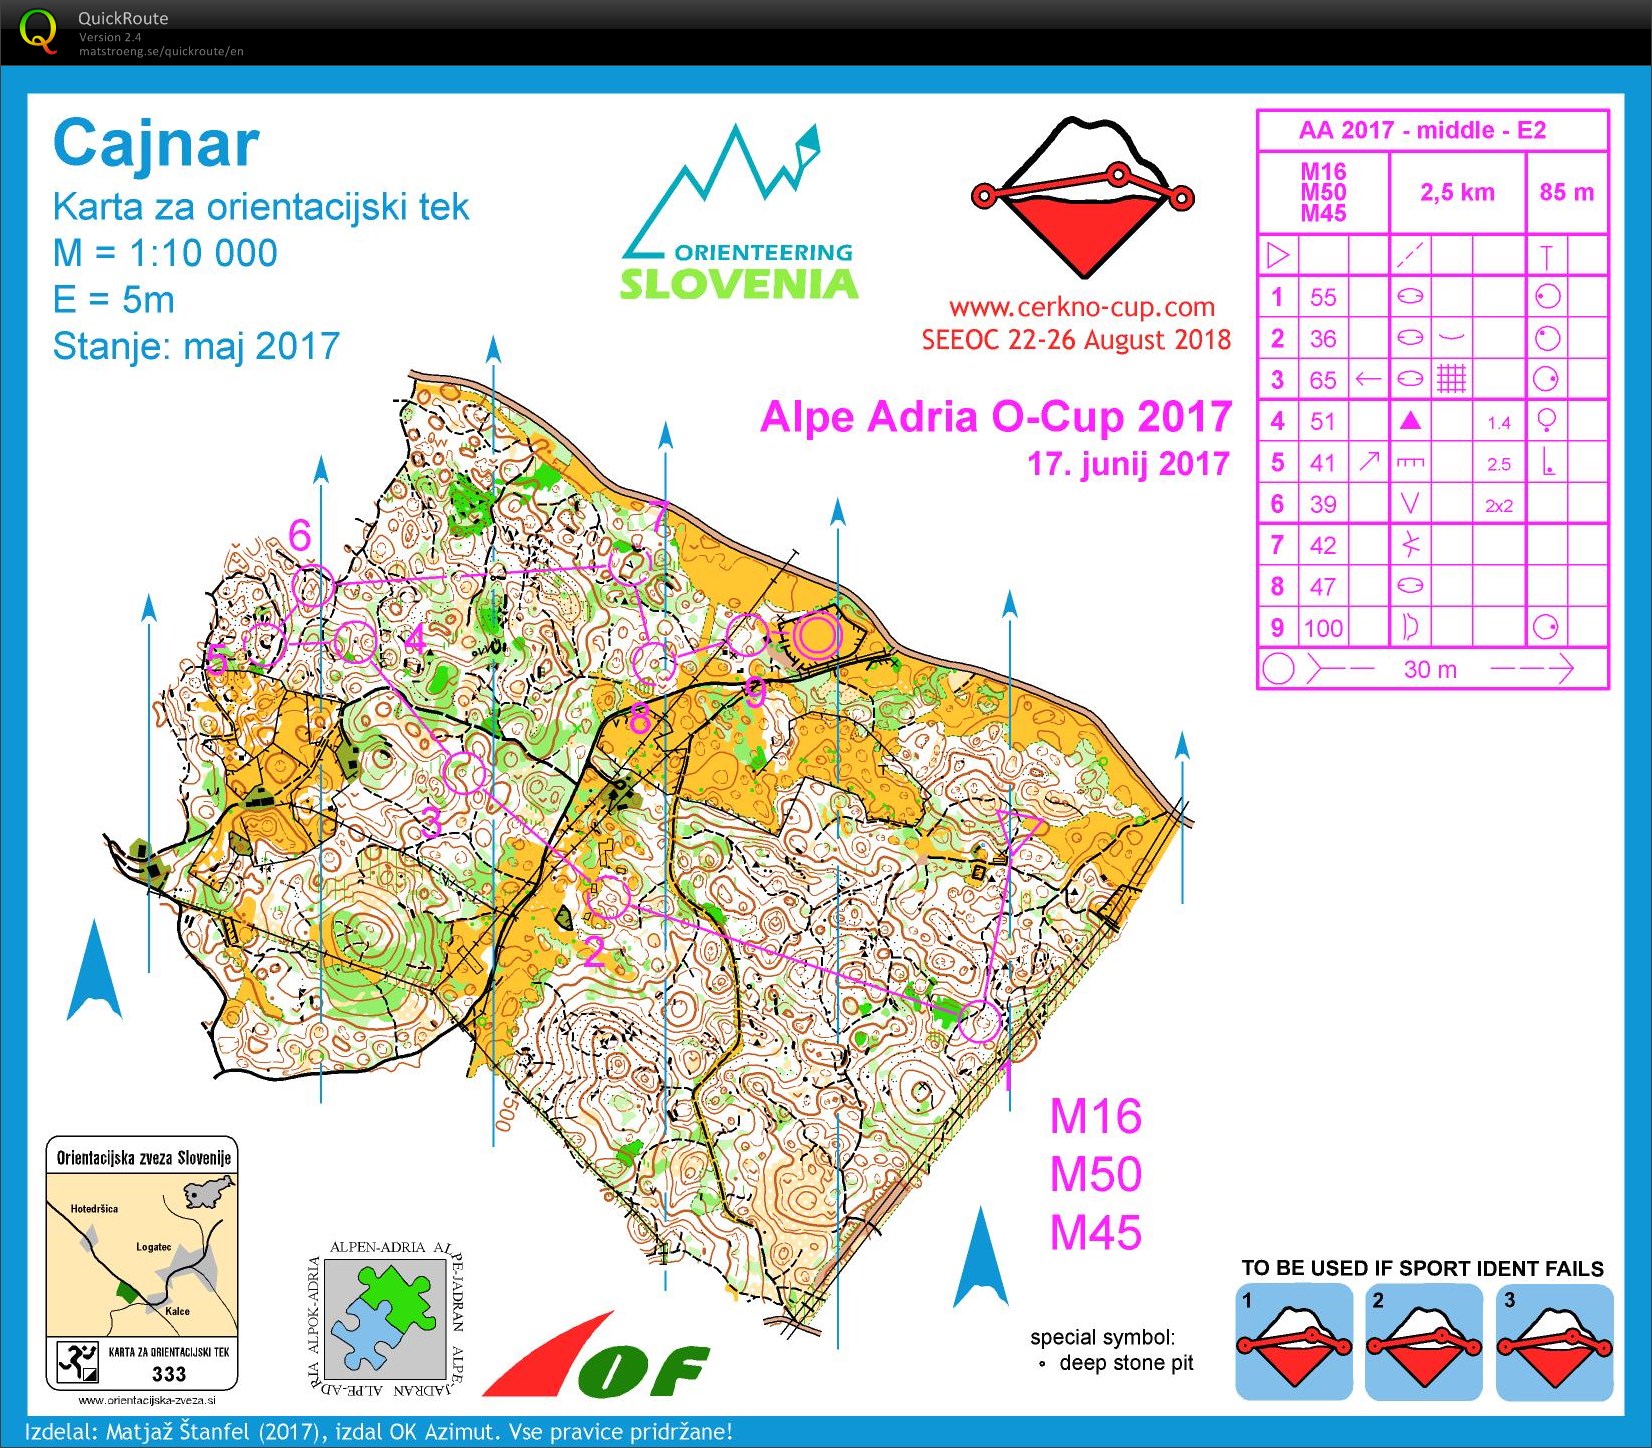 Alpe Adria Orienteering Cup - Middle (17-06-2017)